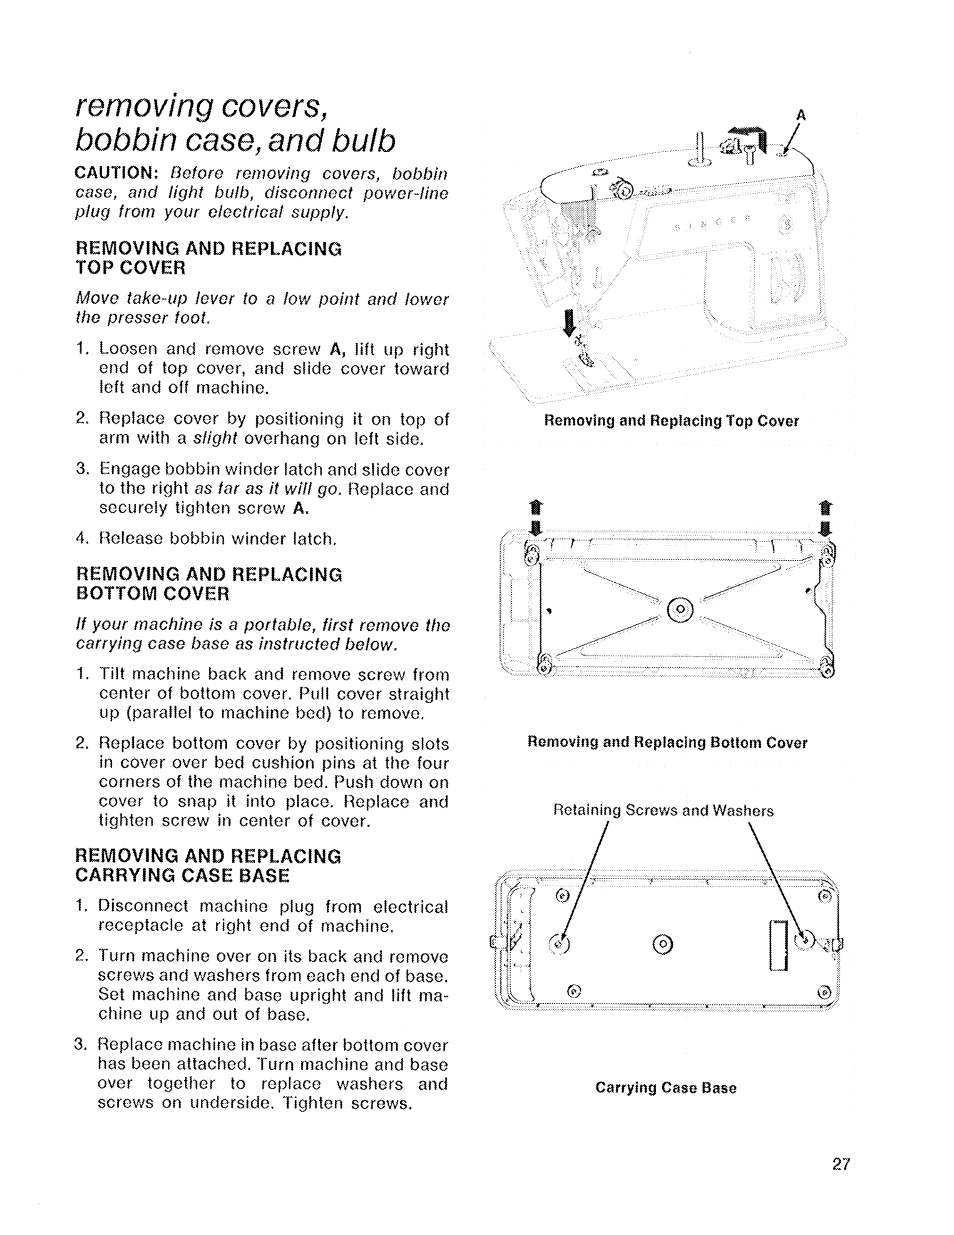 Removing covers, bobbin case, and bulb, Removing and replacing top cover, Removing and replacing bottom cover | Removing and replacing carrying case base | SINGER 719 User Manual | Page 29 / 36